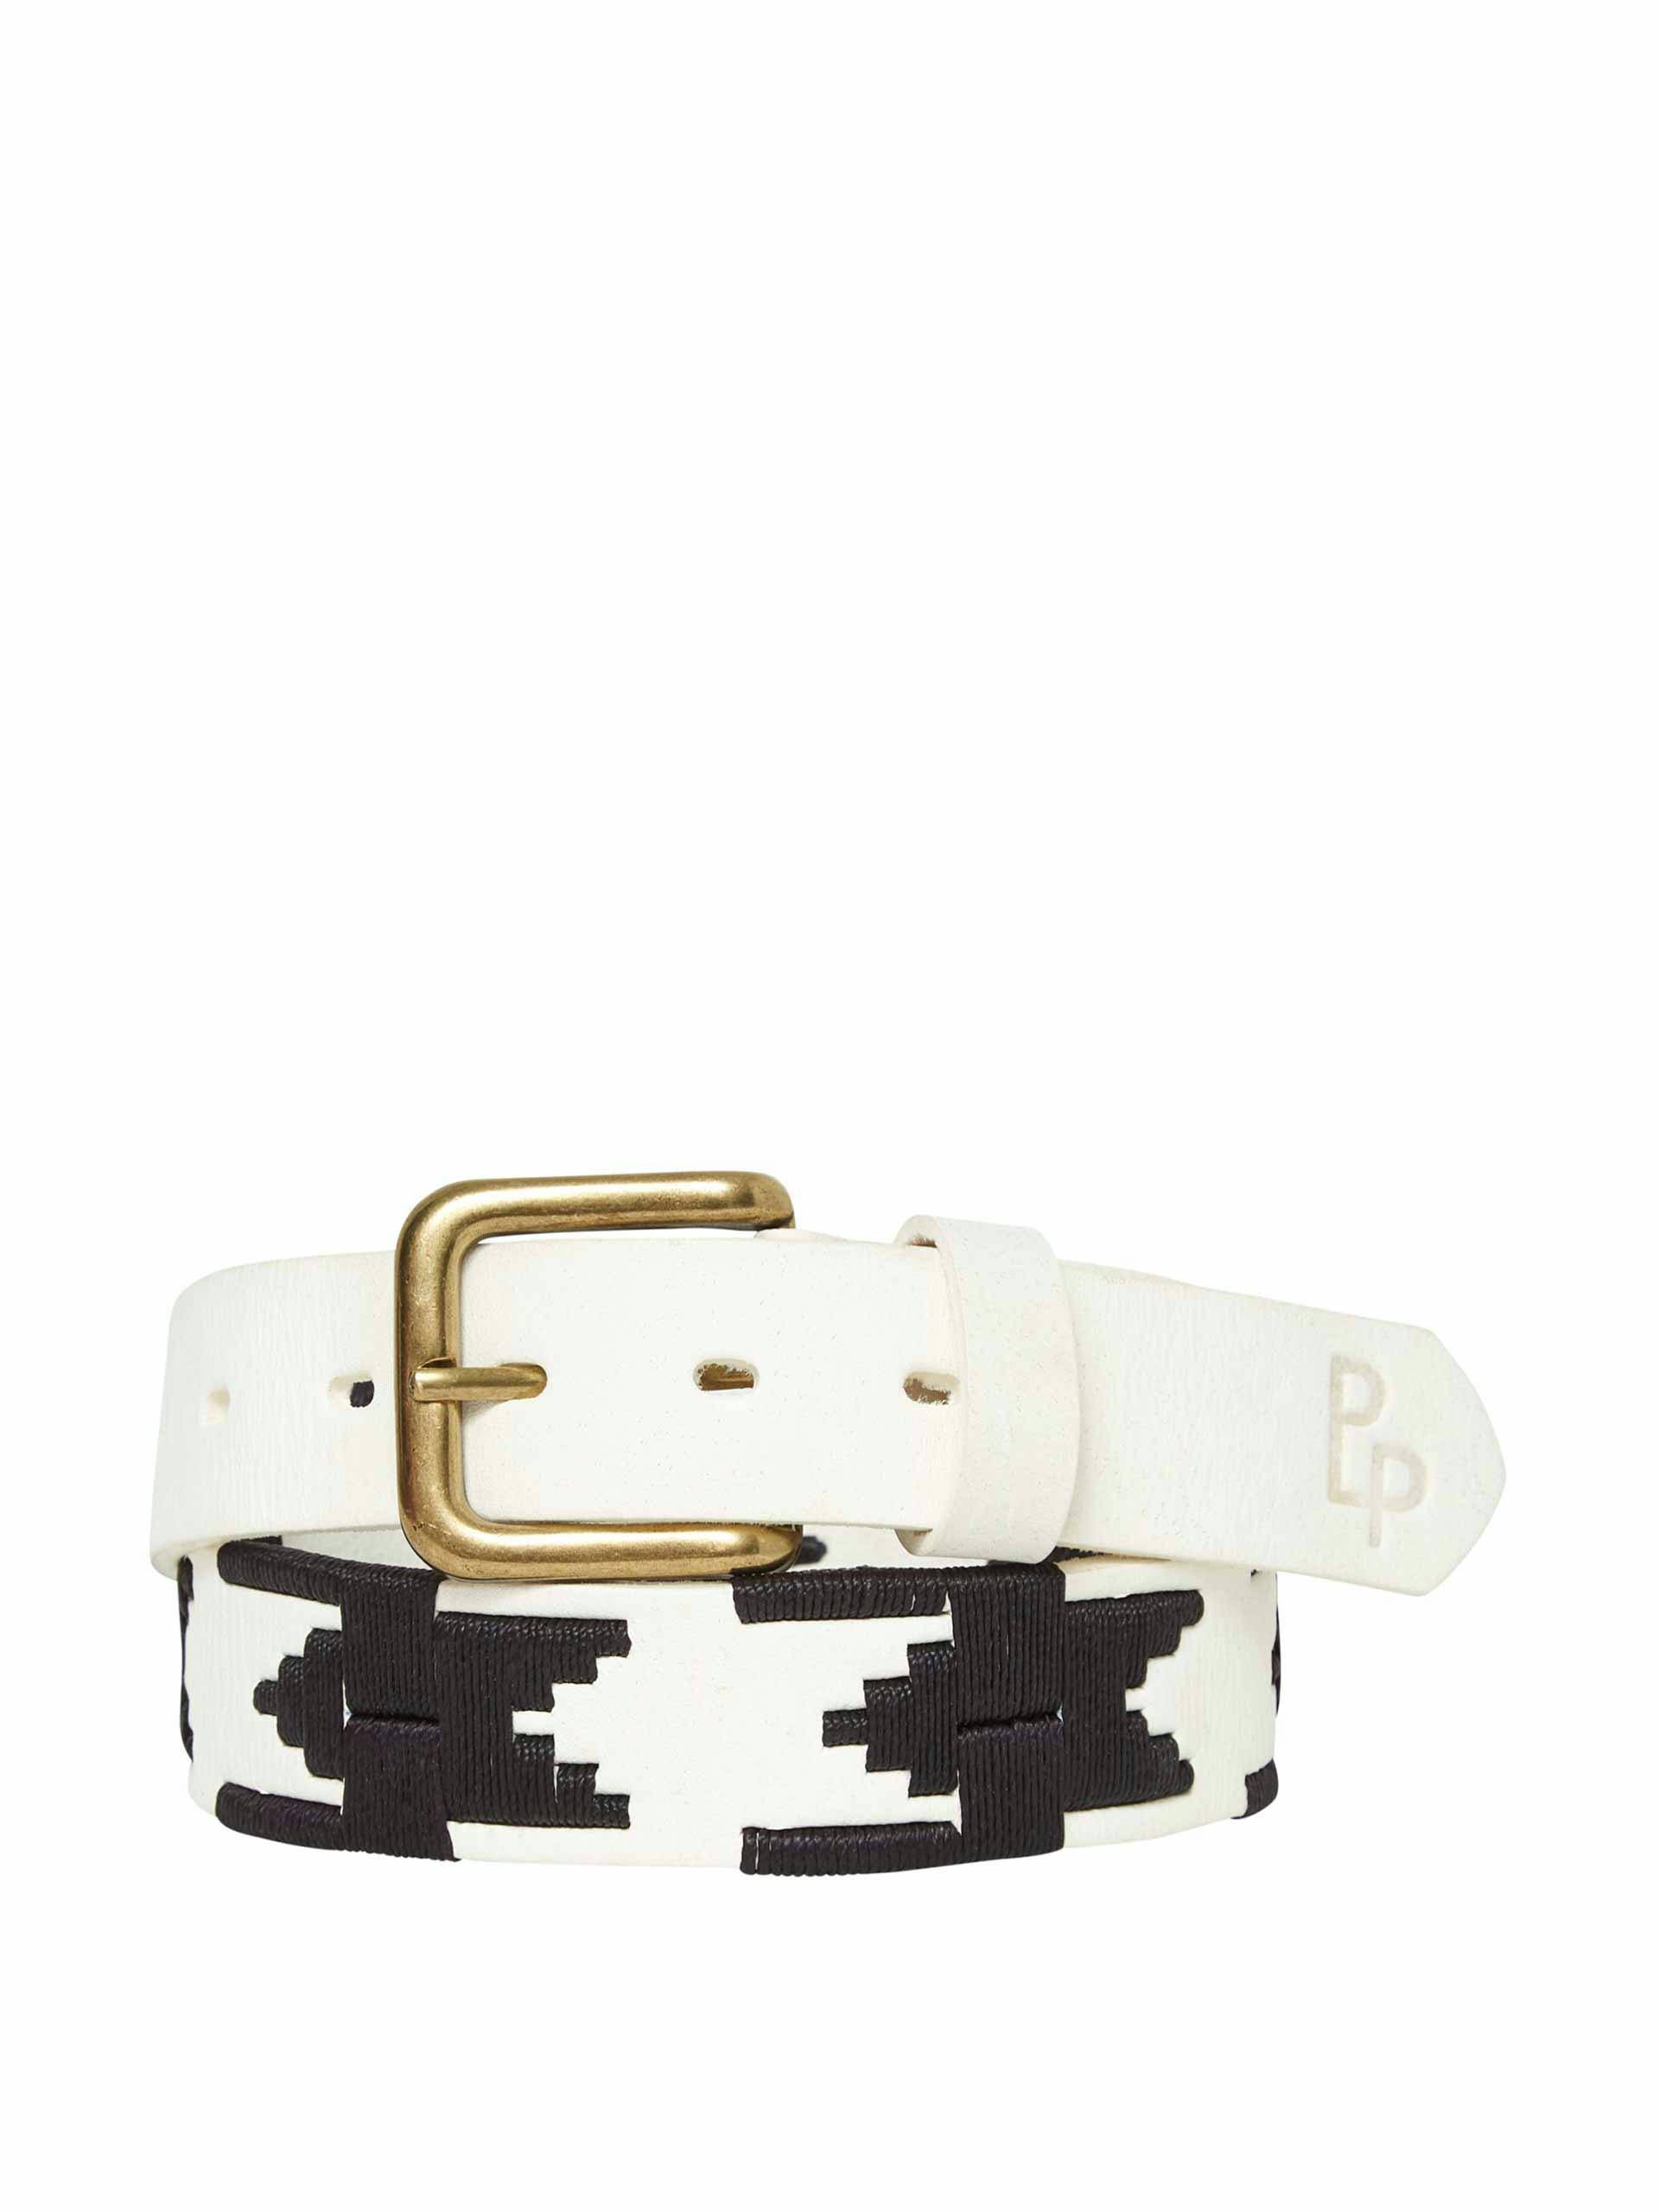 White and black embroidered leather belt